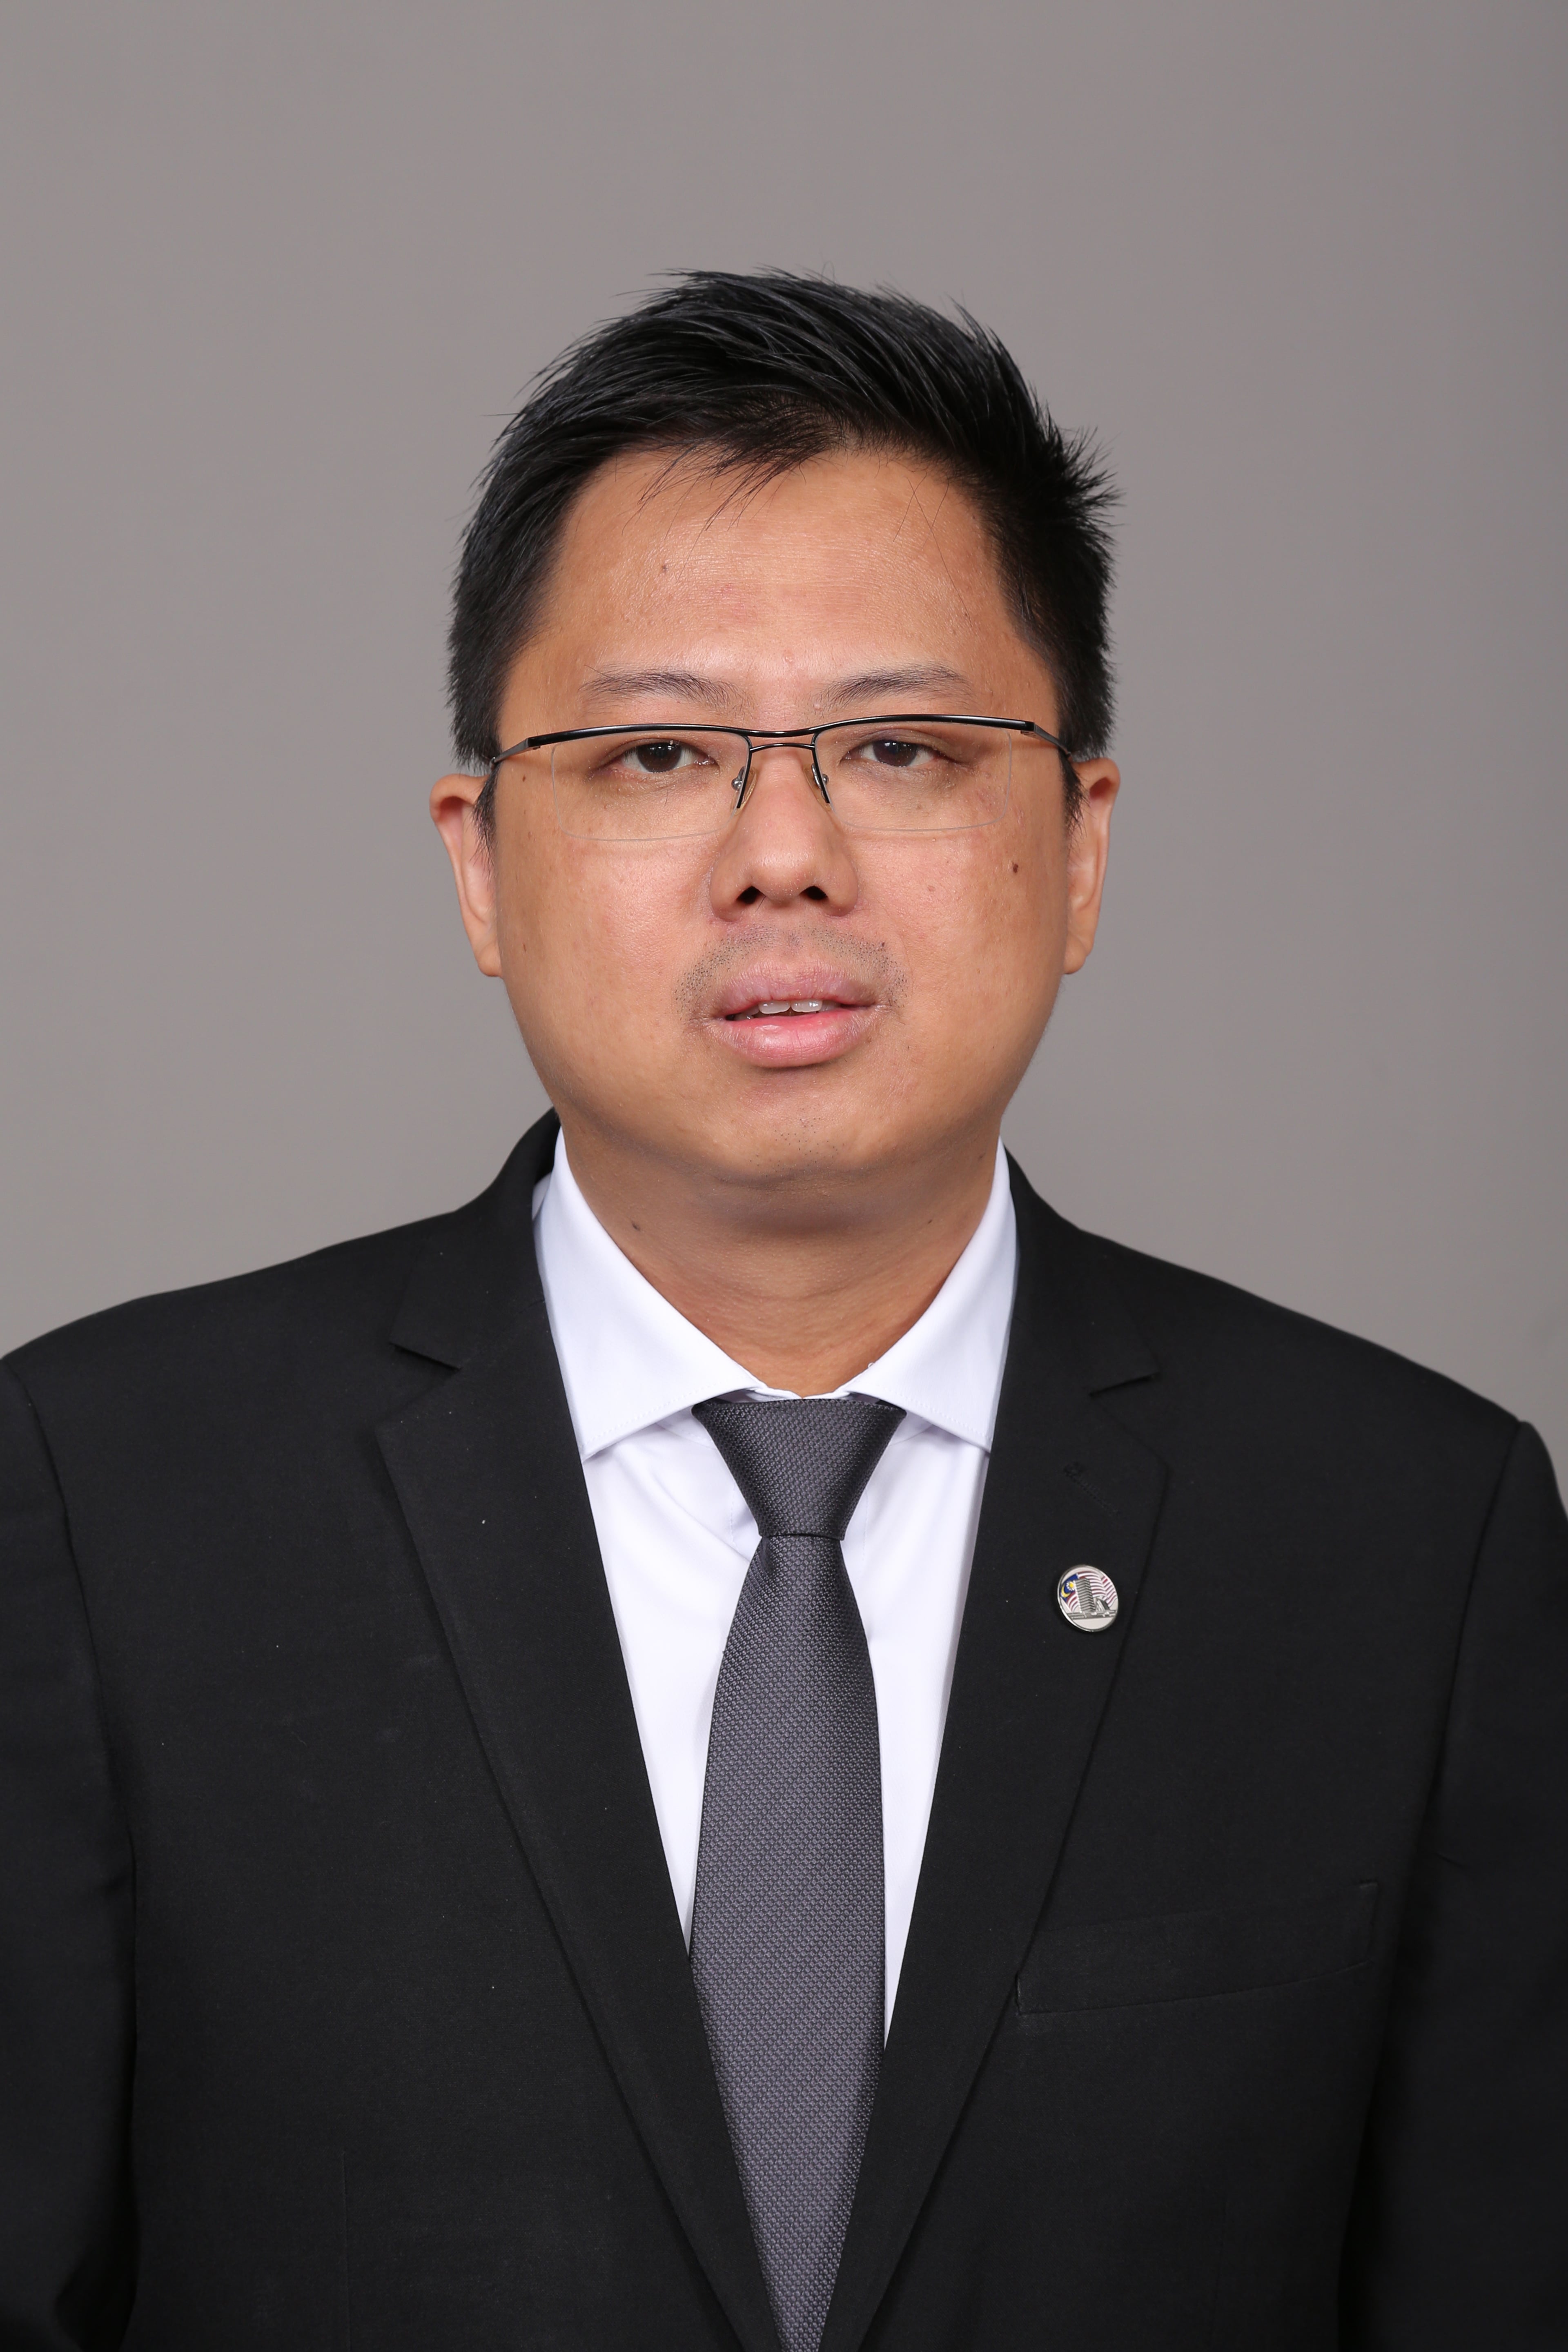 Photo - YB Tuan Chow Yu Hui - Click to open the Member of Parliament profile